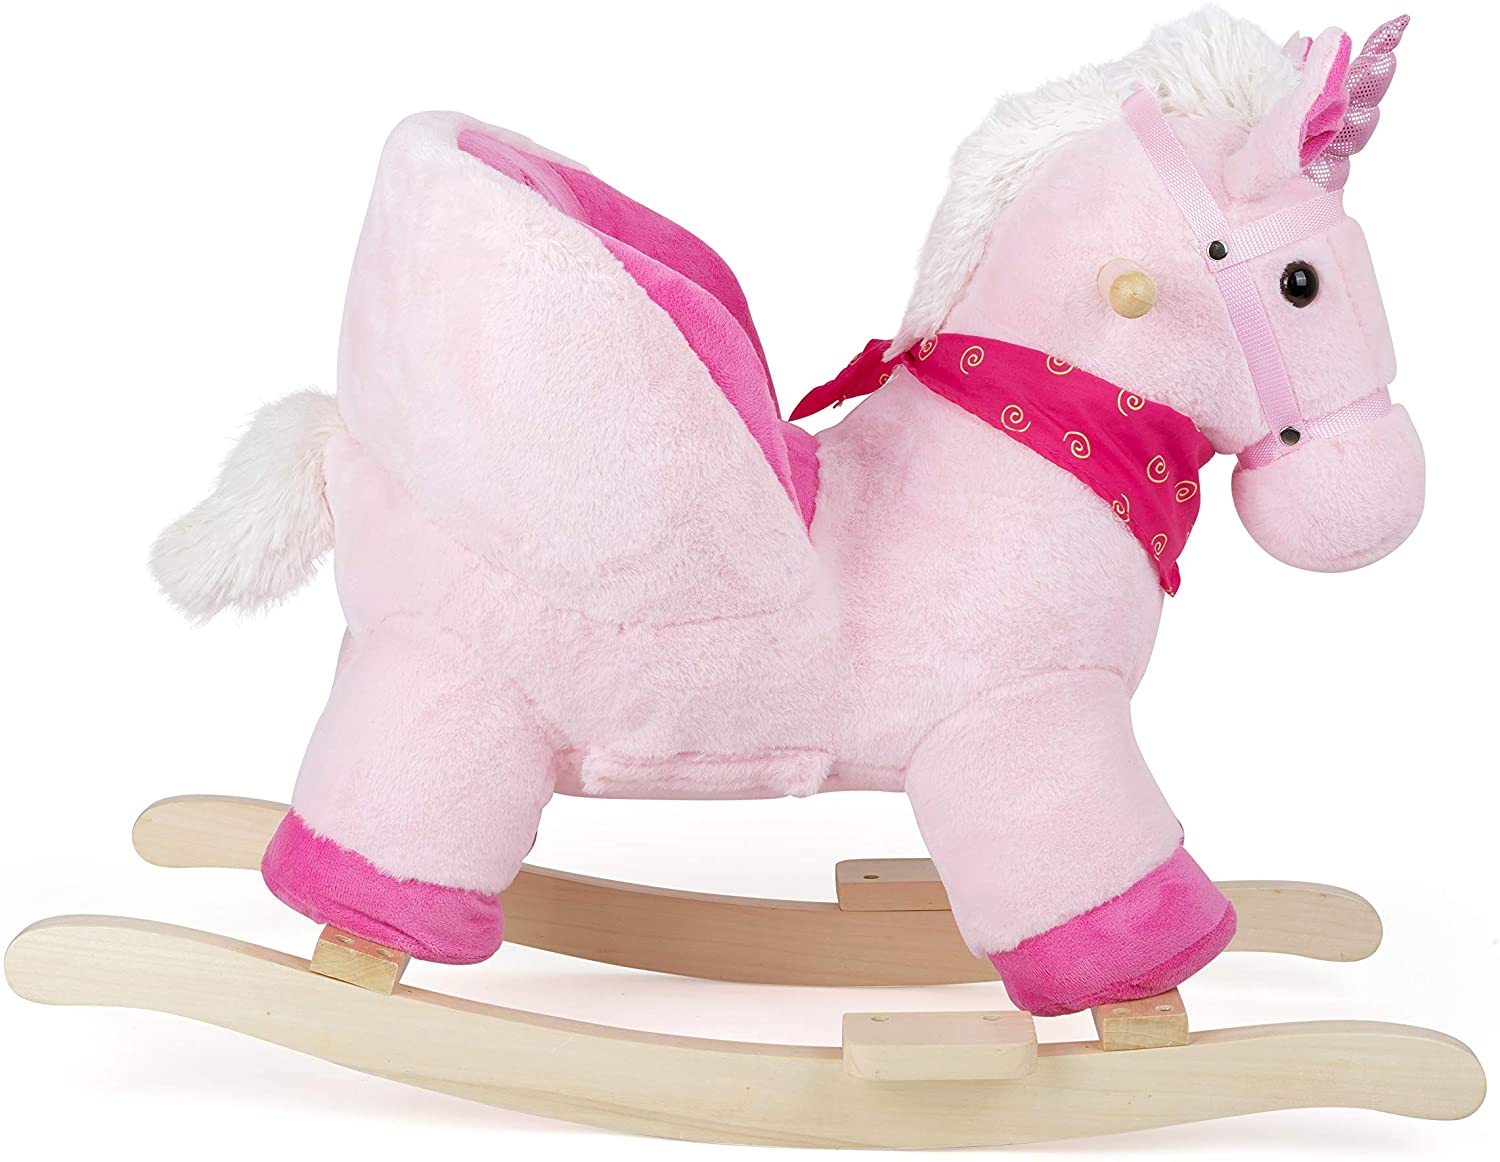 Small Foot 11181 Rocking unicorn with sound, seat height 30 cm, loadable up to approx. 25 kg toy, pink unicorn rocking horse